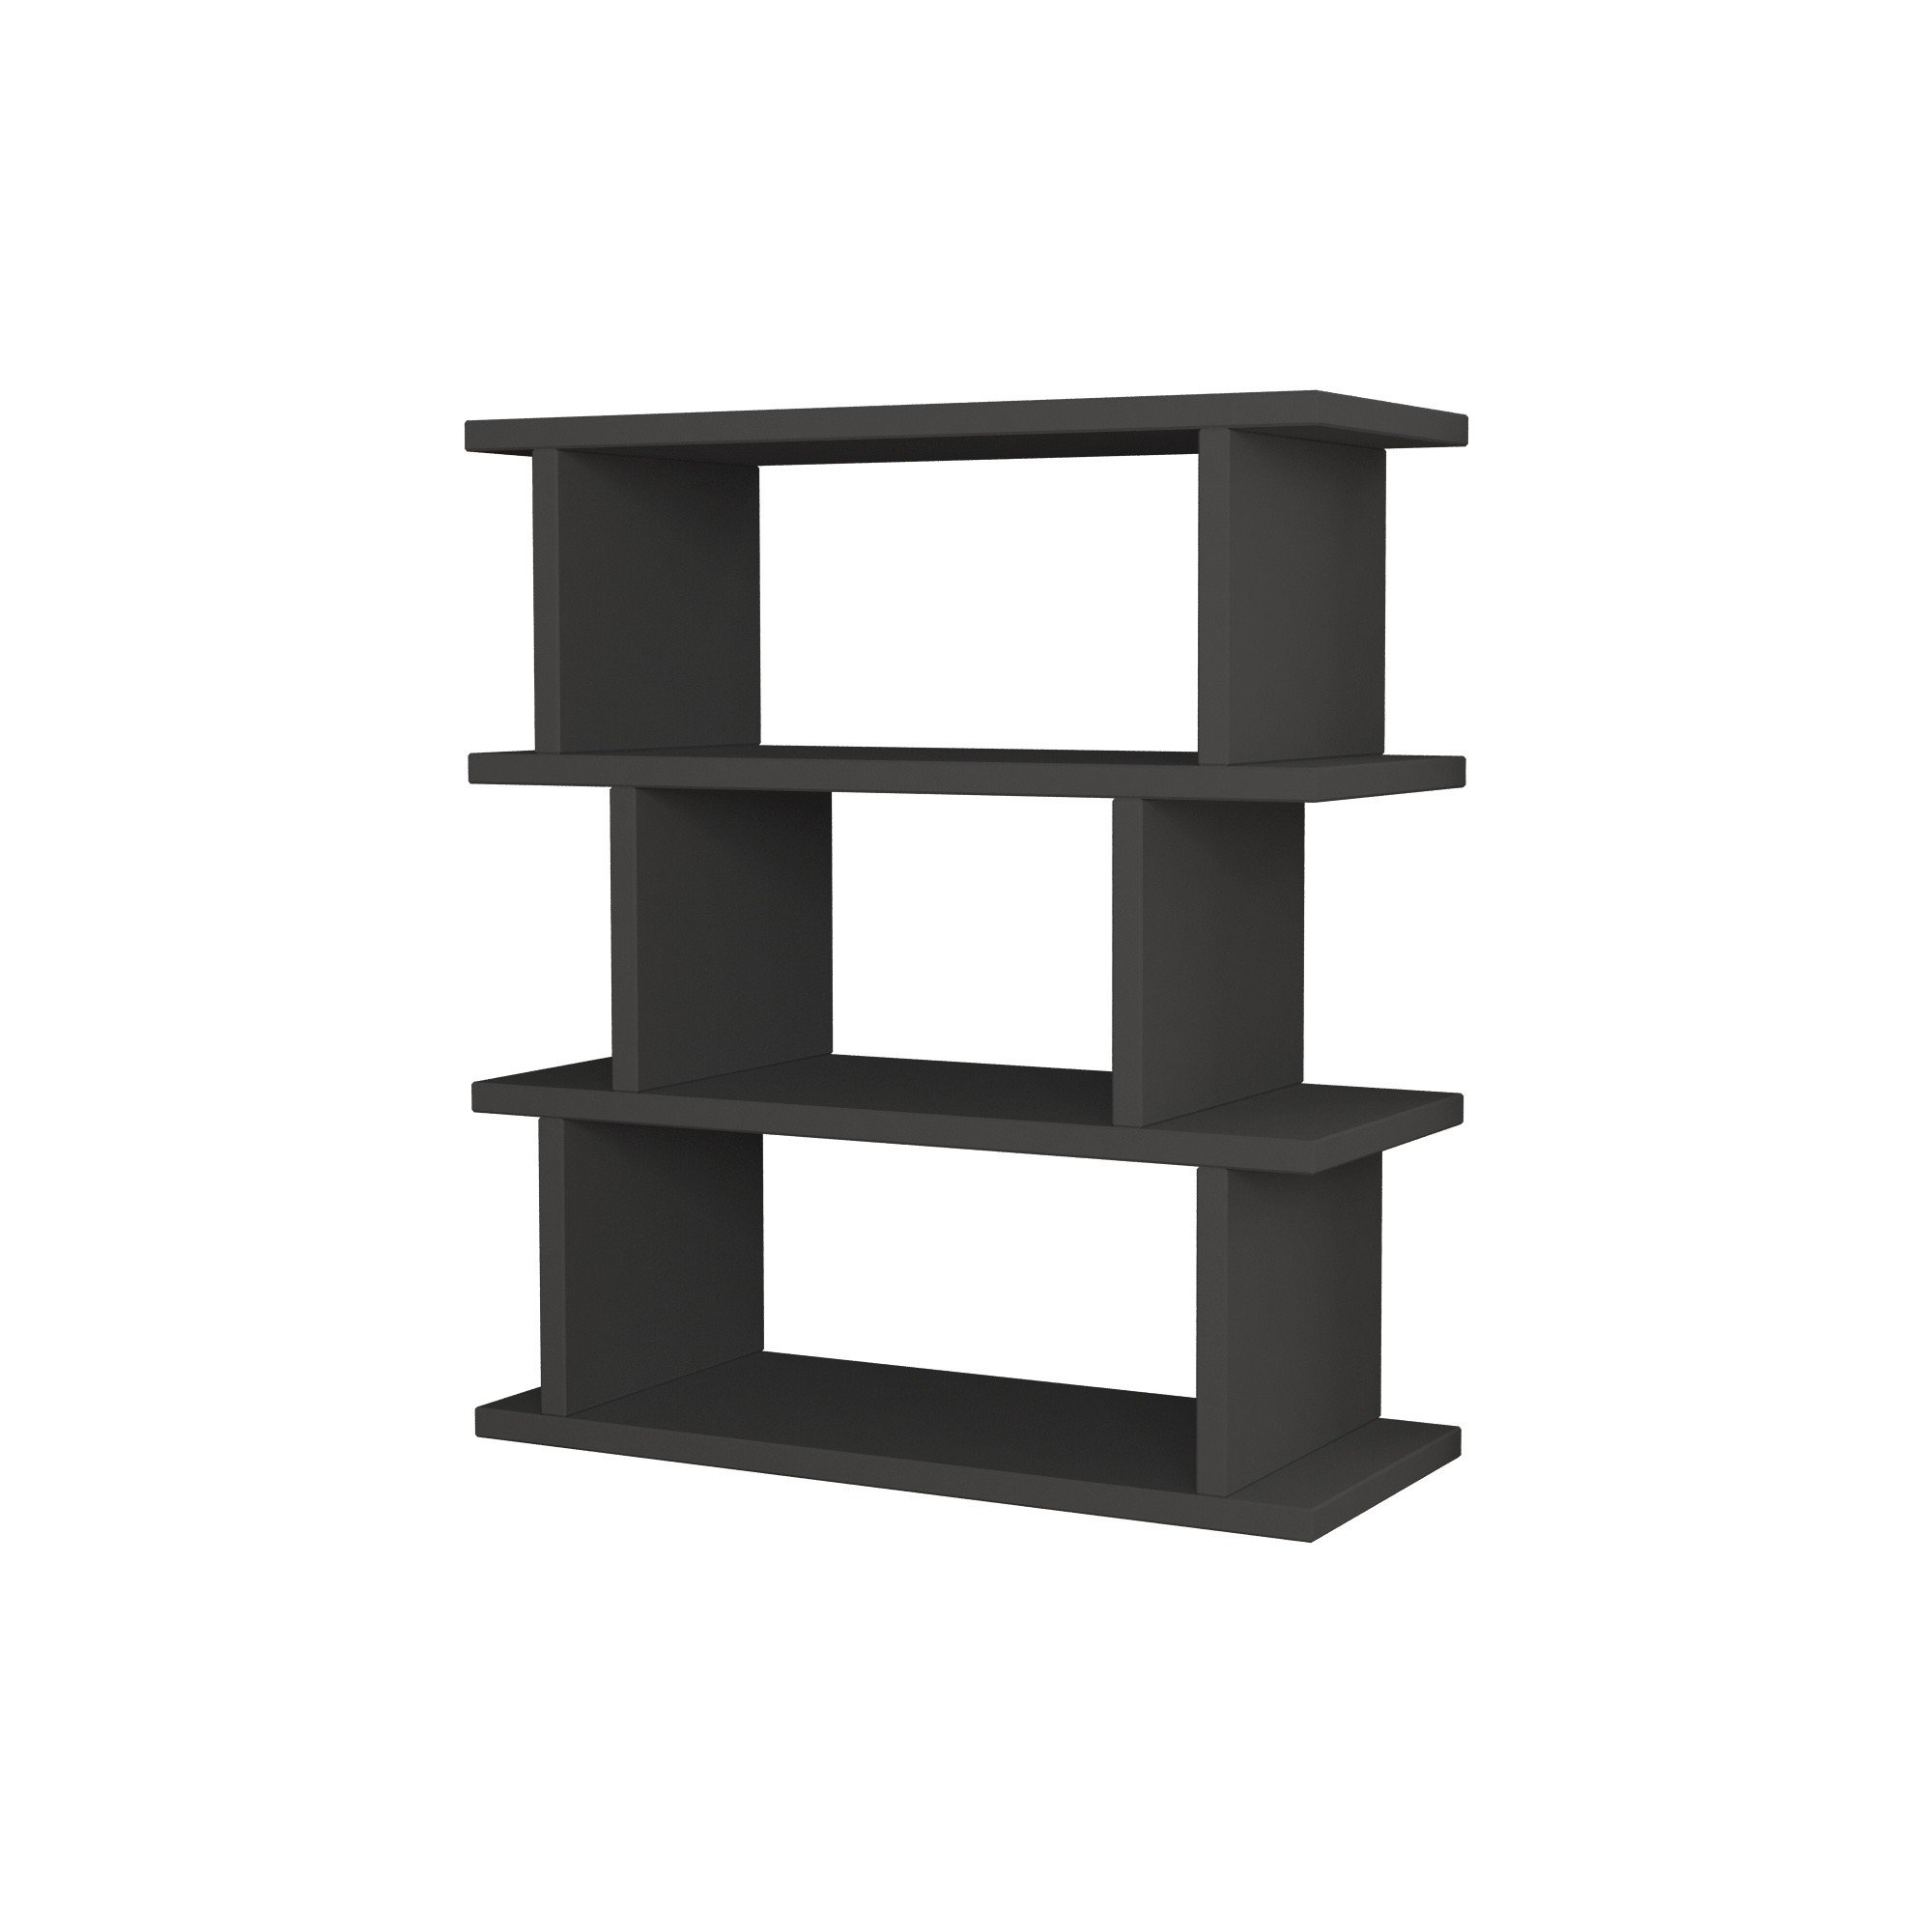 TOTEM SIDE TABLE - ANTHRACITE - M.SH.11245.10